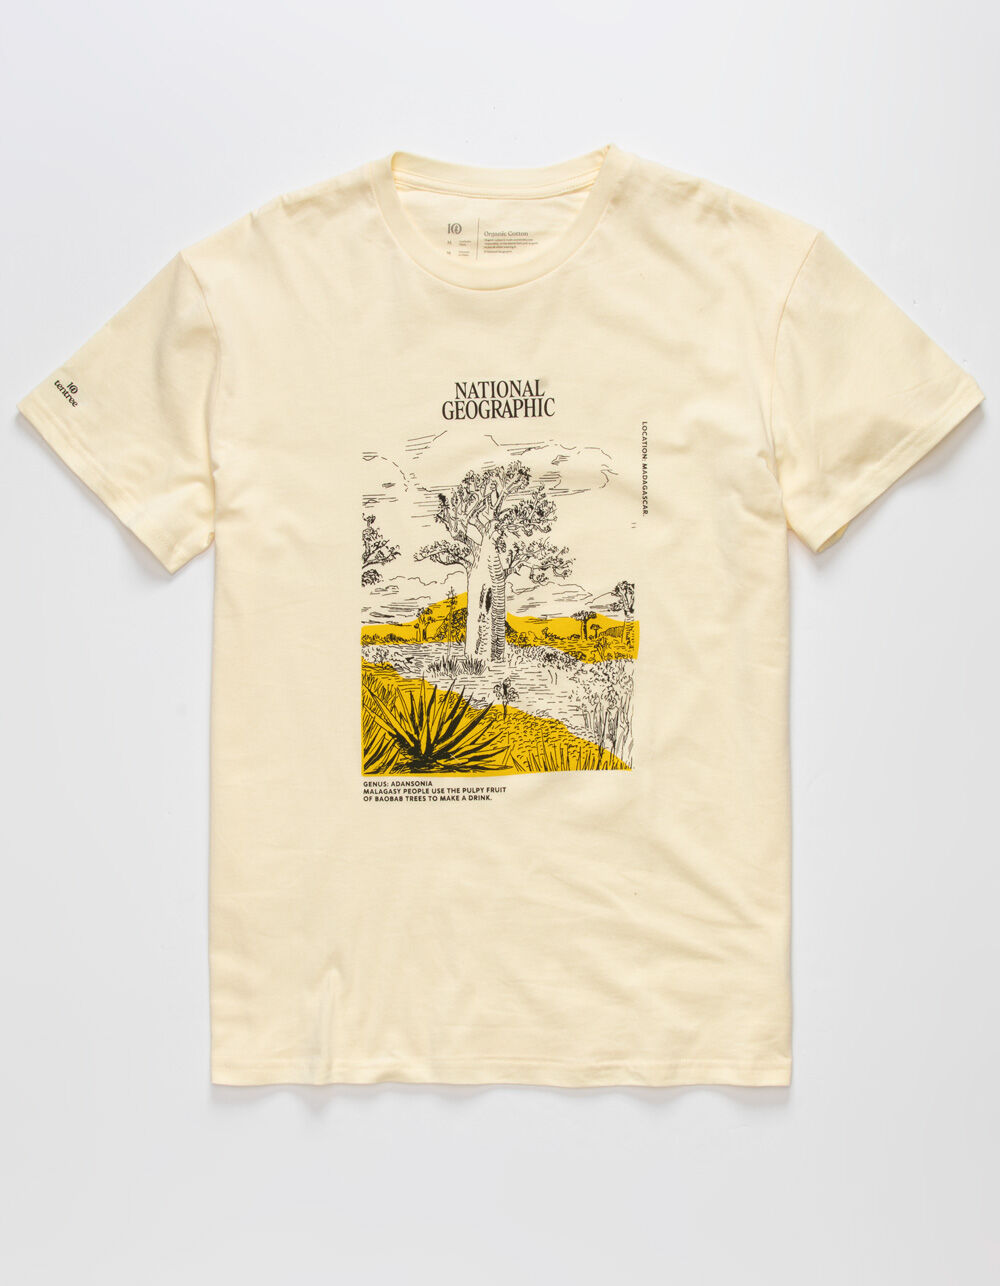 TENTREE x National Geographic Baobab Mens Tee - OFF WHITE | Tillys